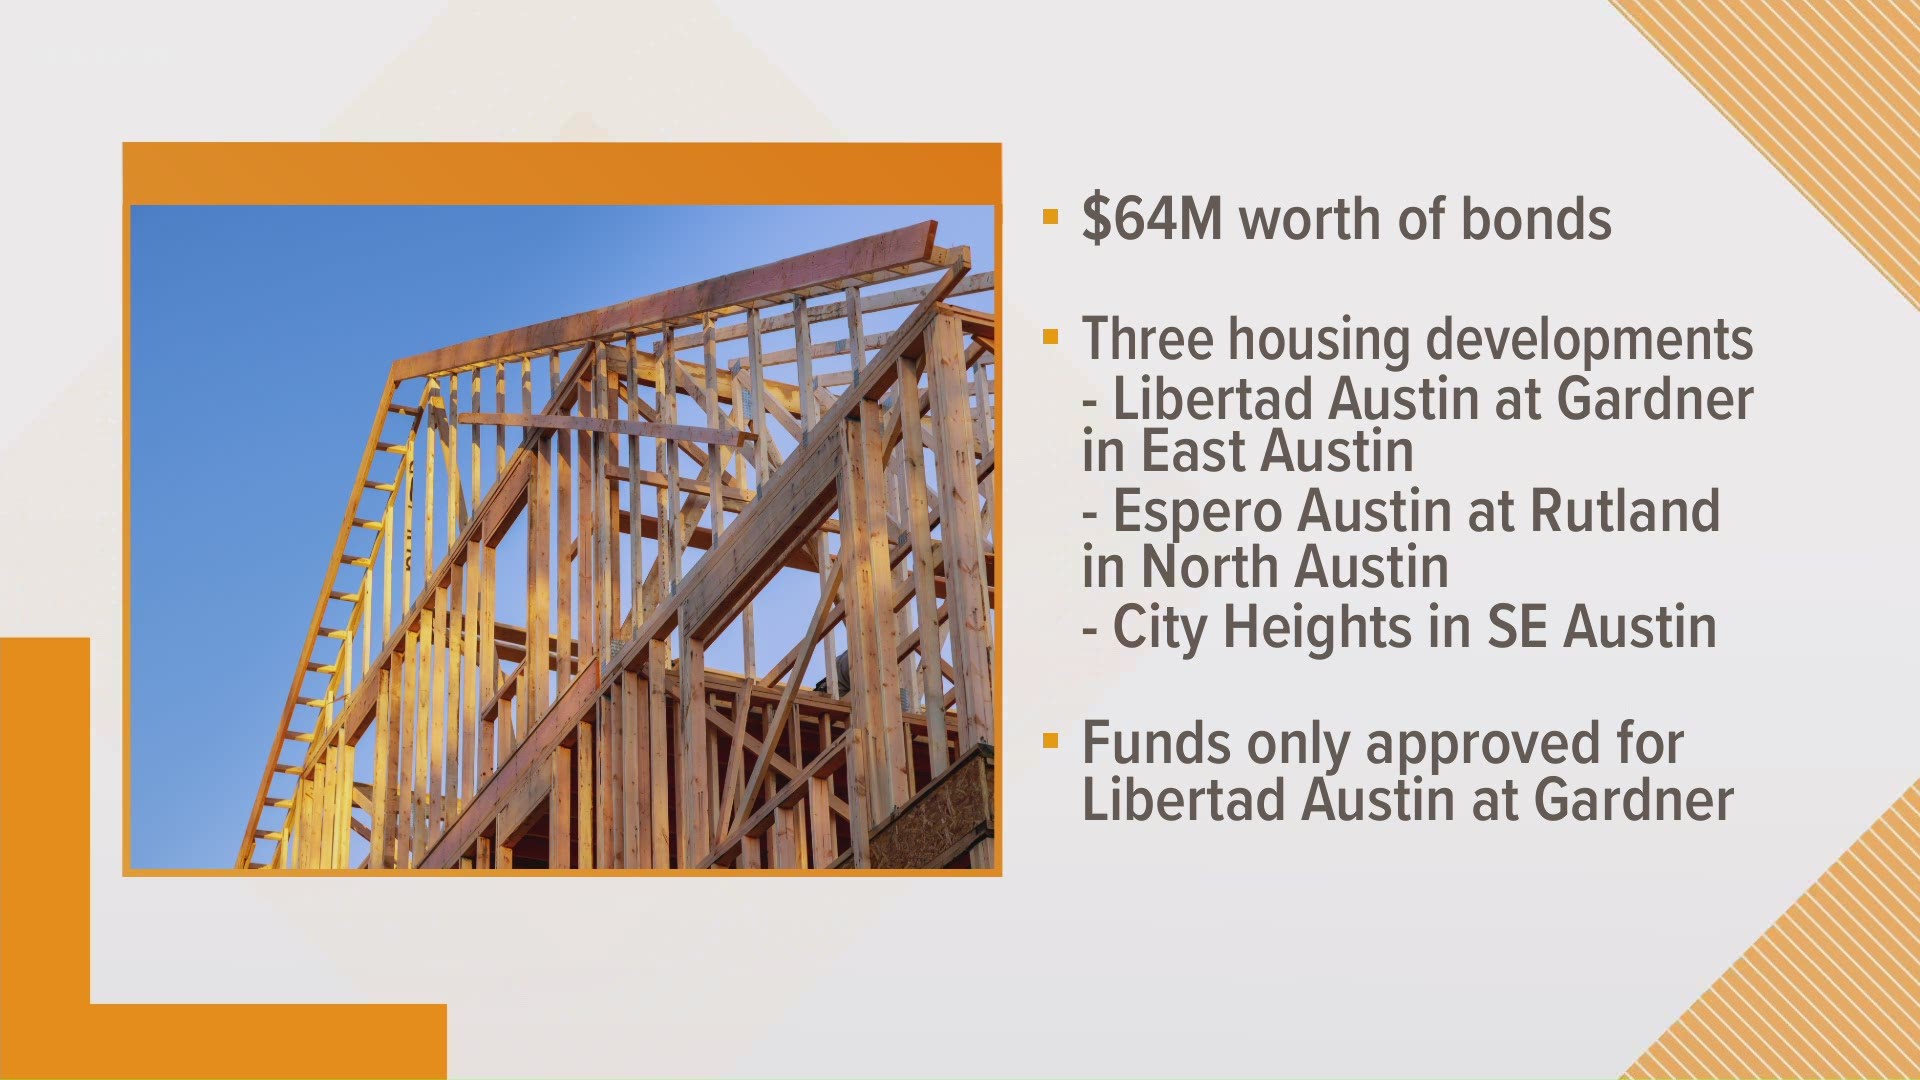 The city council discussed getting up to $64 million worth of bonds for three new housing developments.